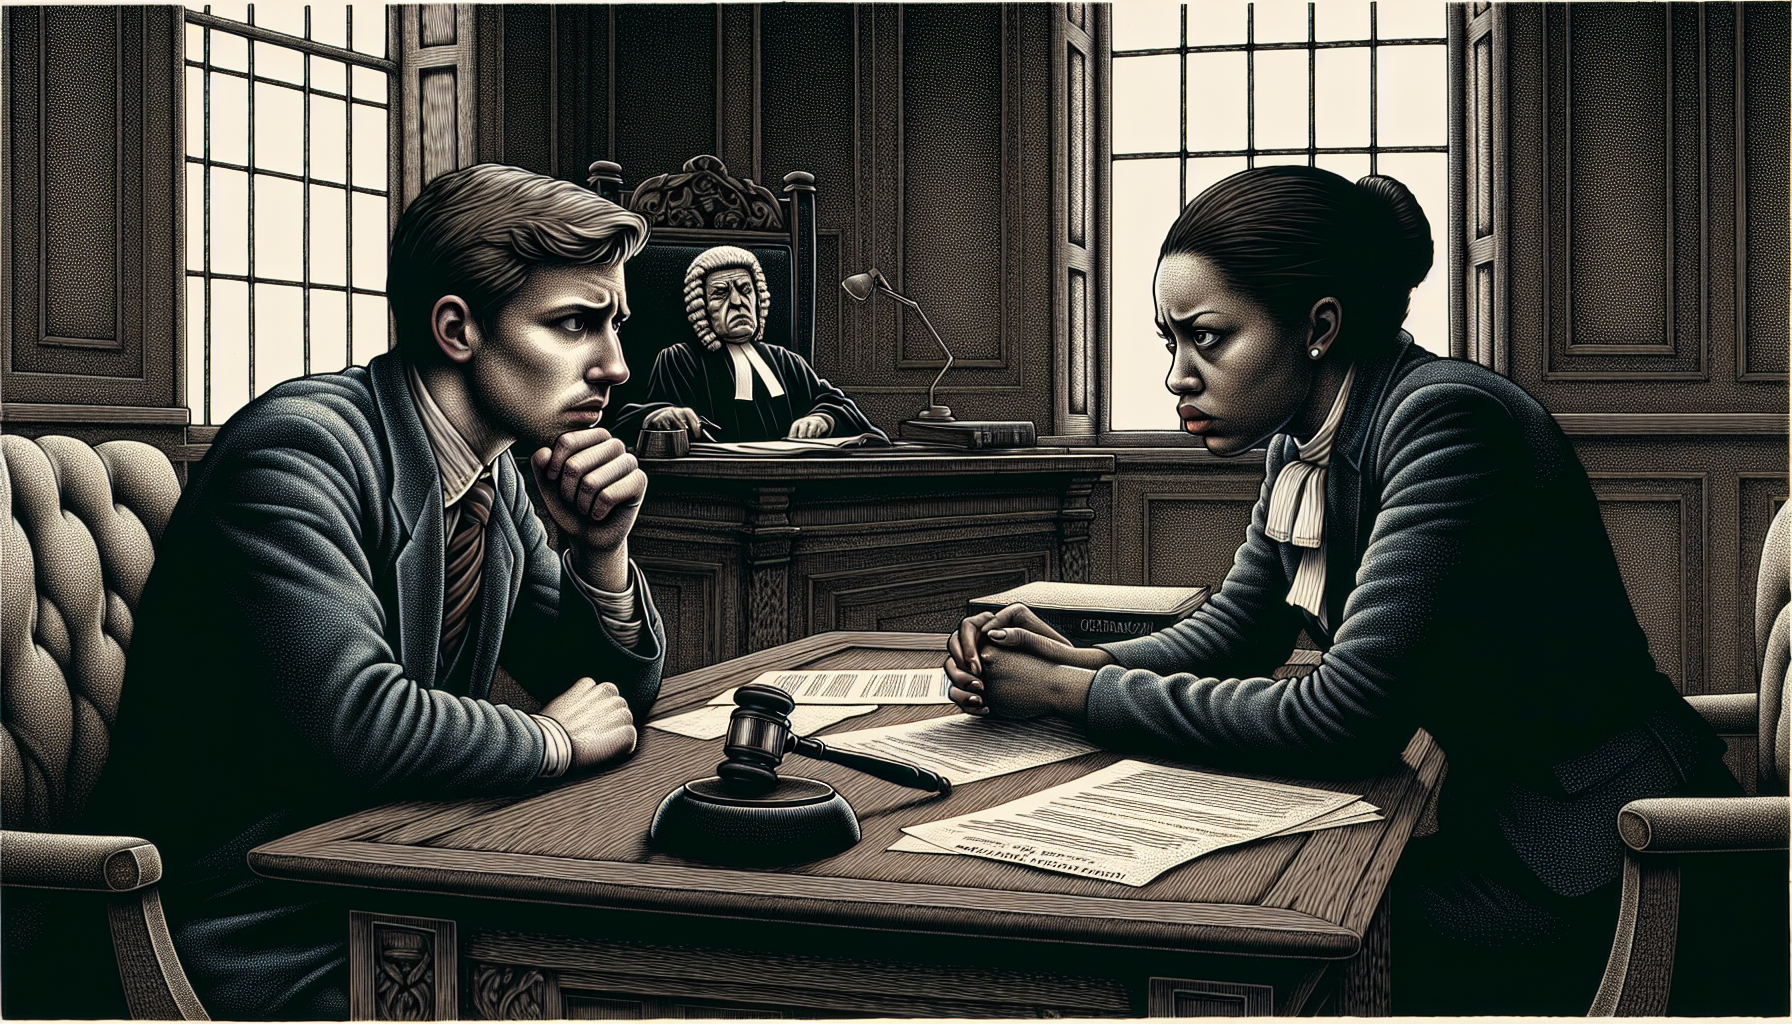 Illustration of a person consulting with a solicitor